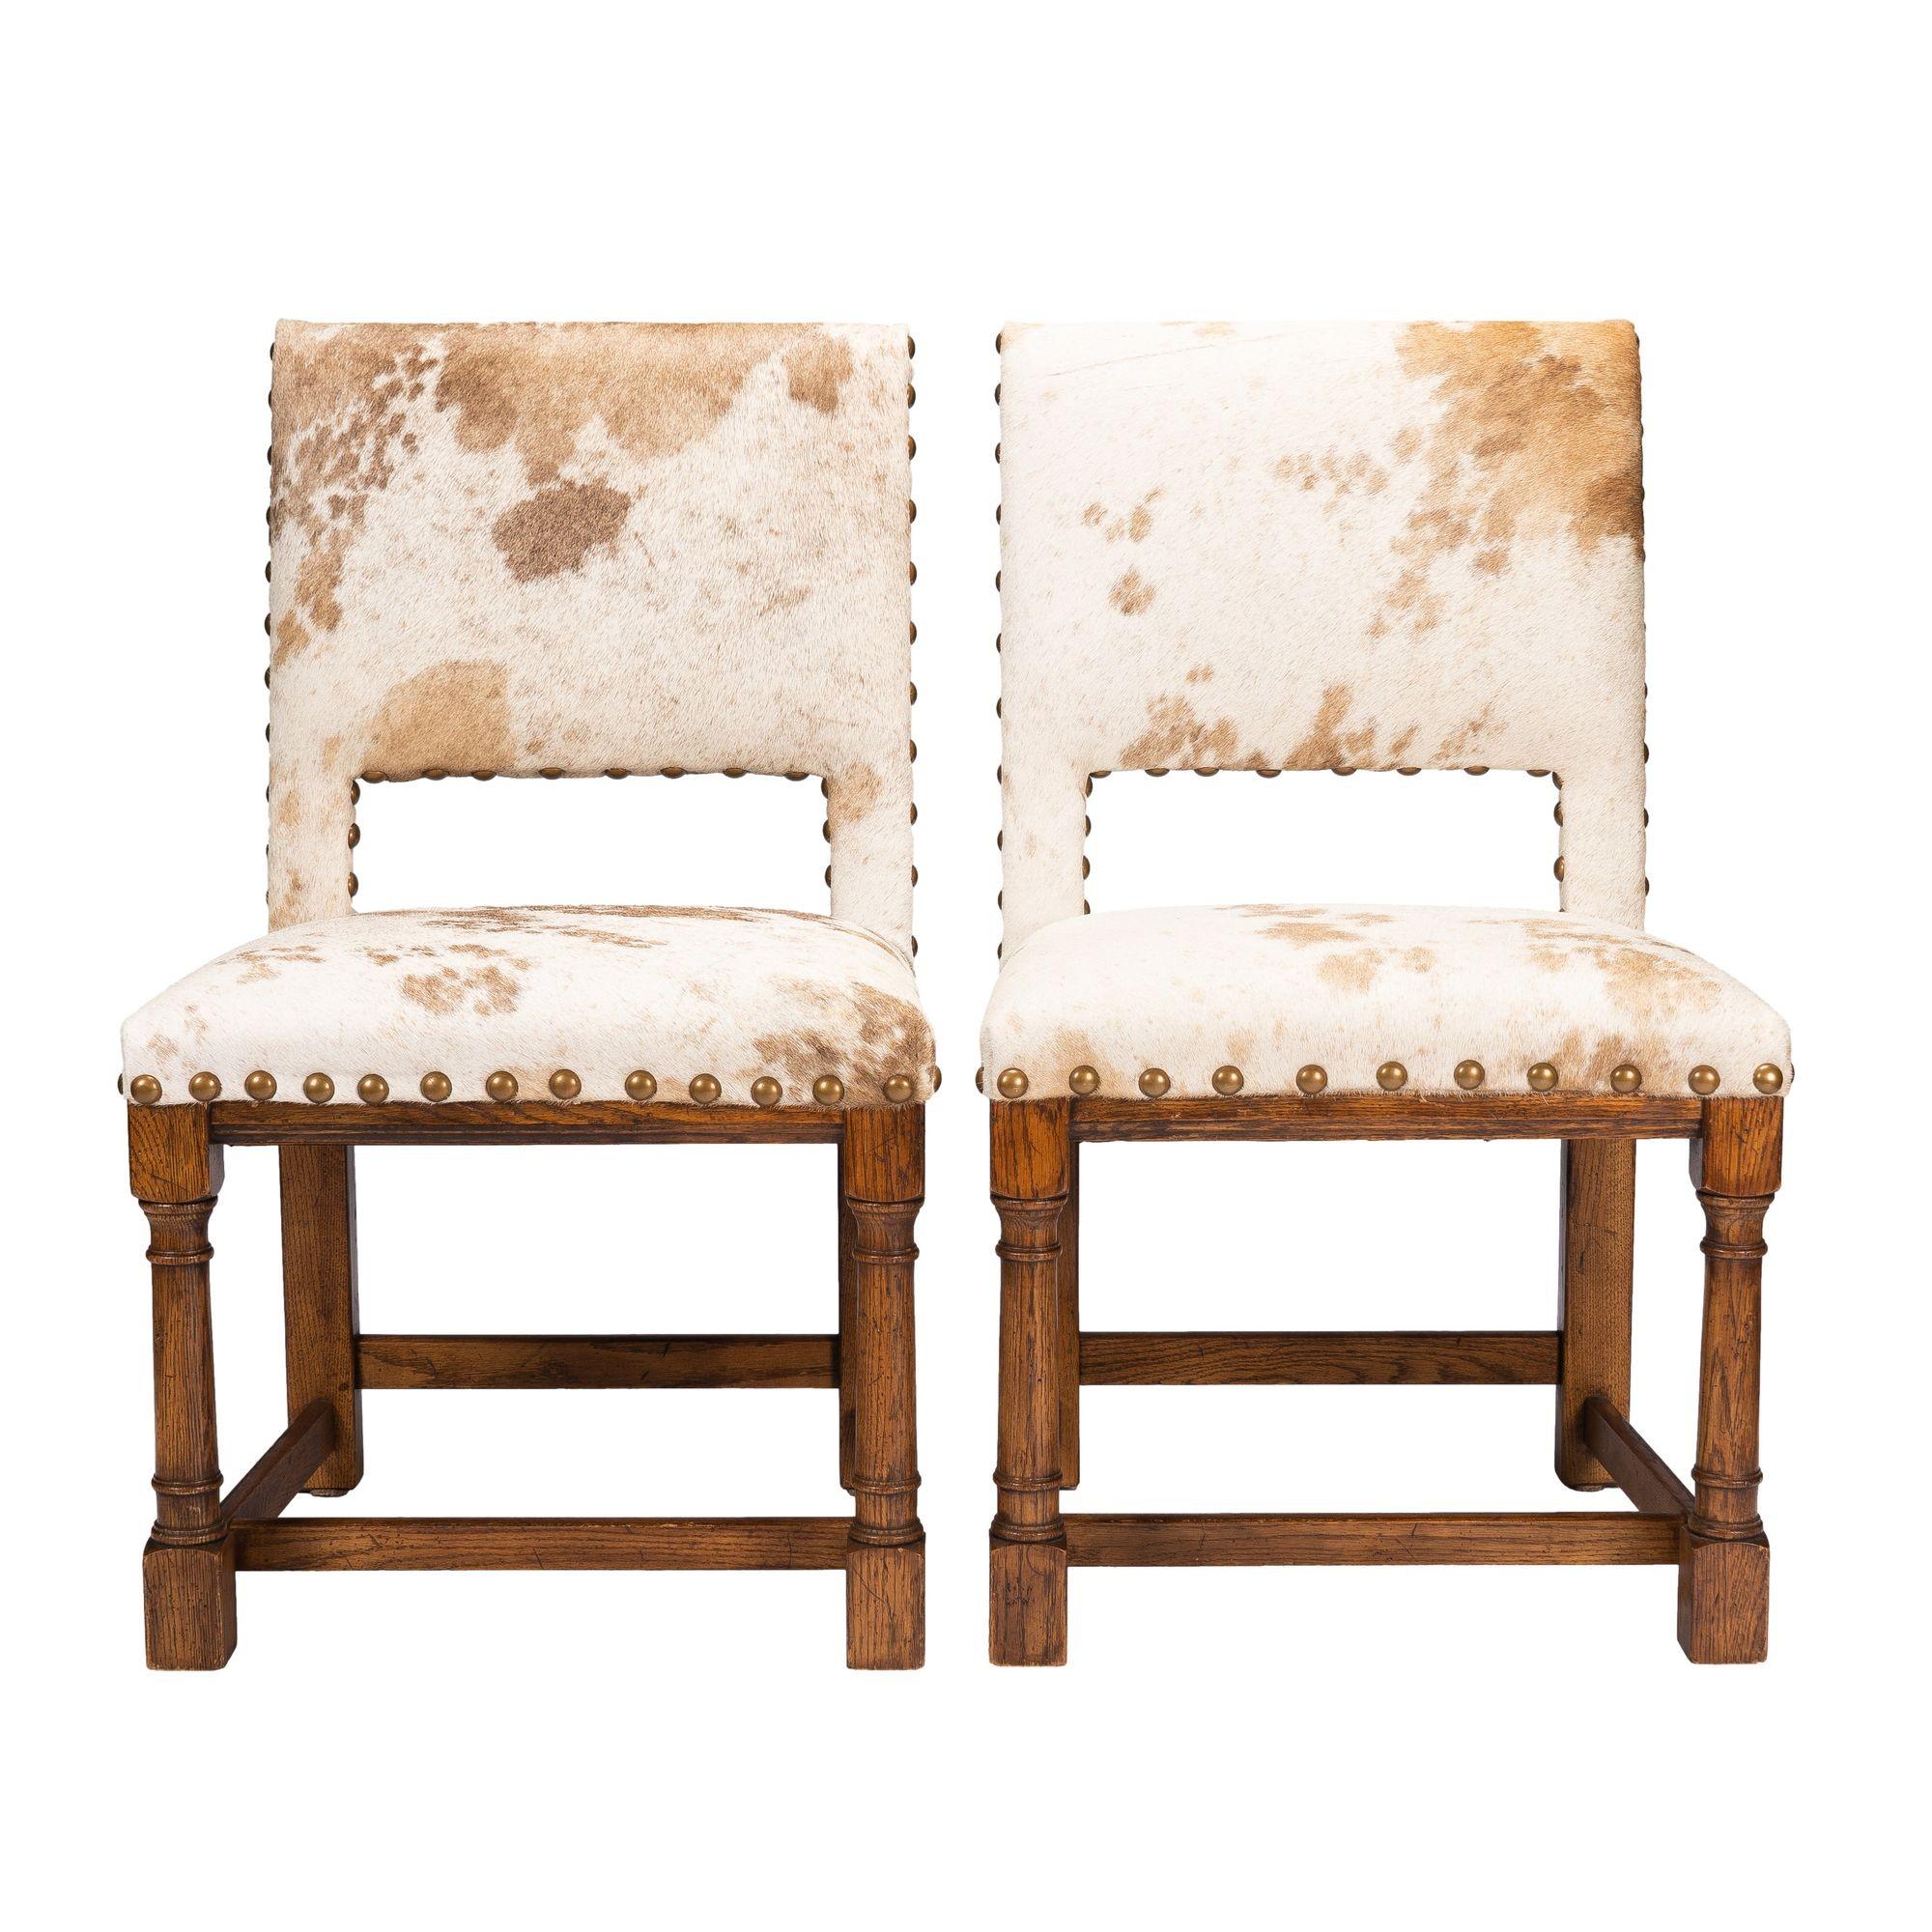 Pair of Academic Revival, Jacobean style, oak framed side chairs upholstered in calf hide with brass nail head trim. The upholstered square chair back continues into square back legs opposite columnar turned front legs attached to the corners of the